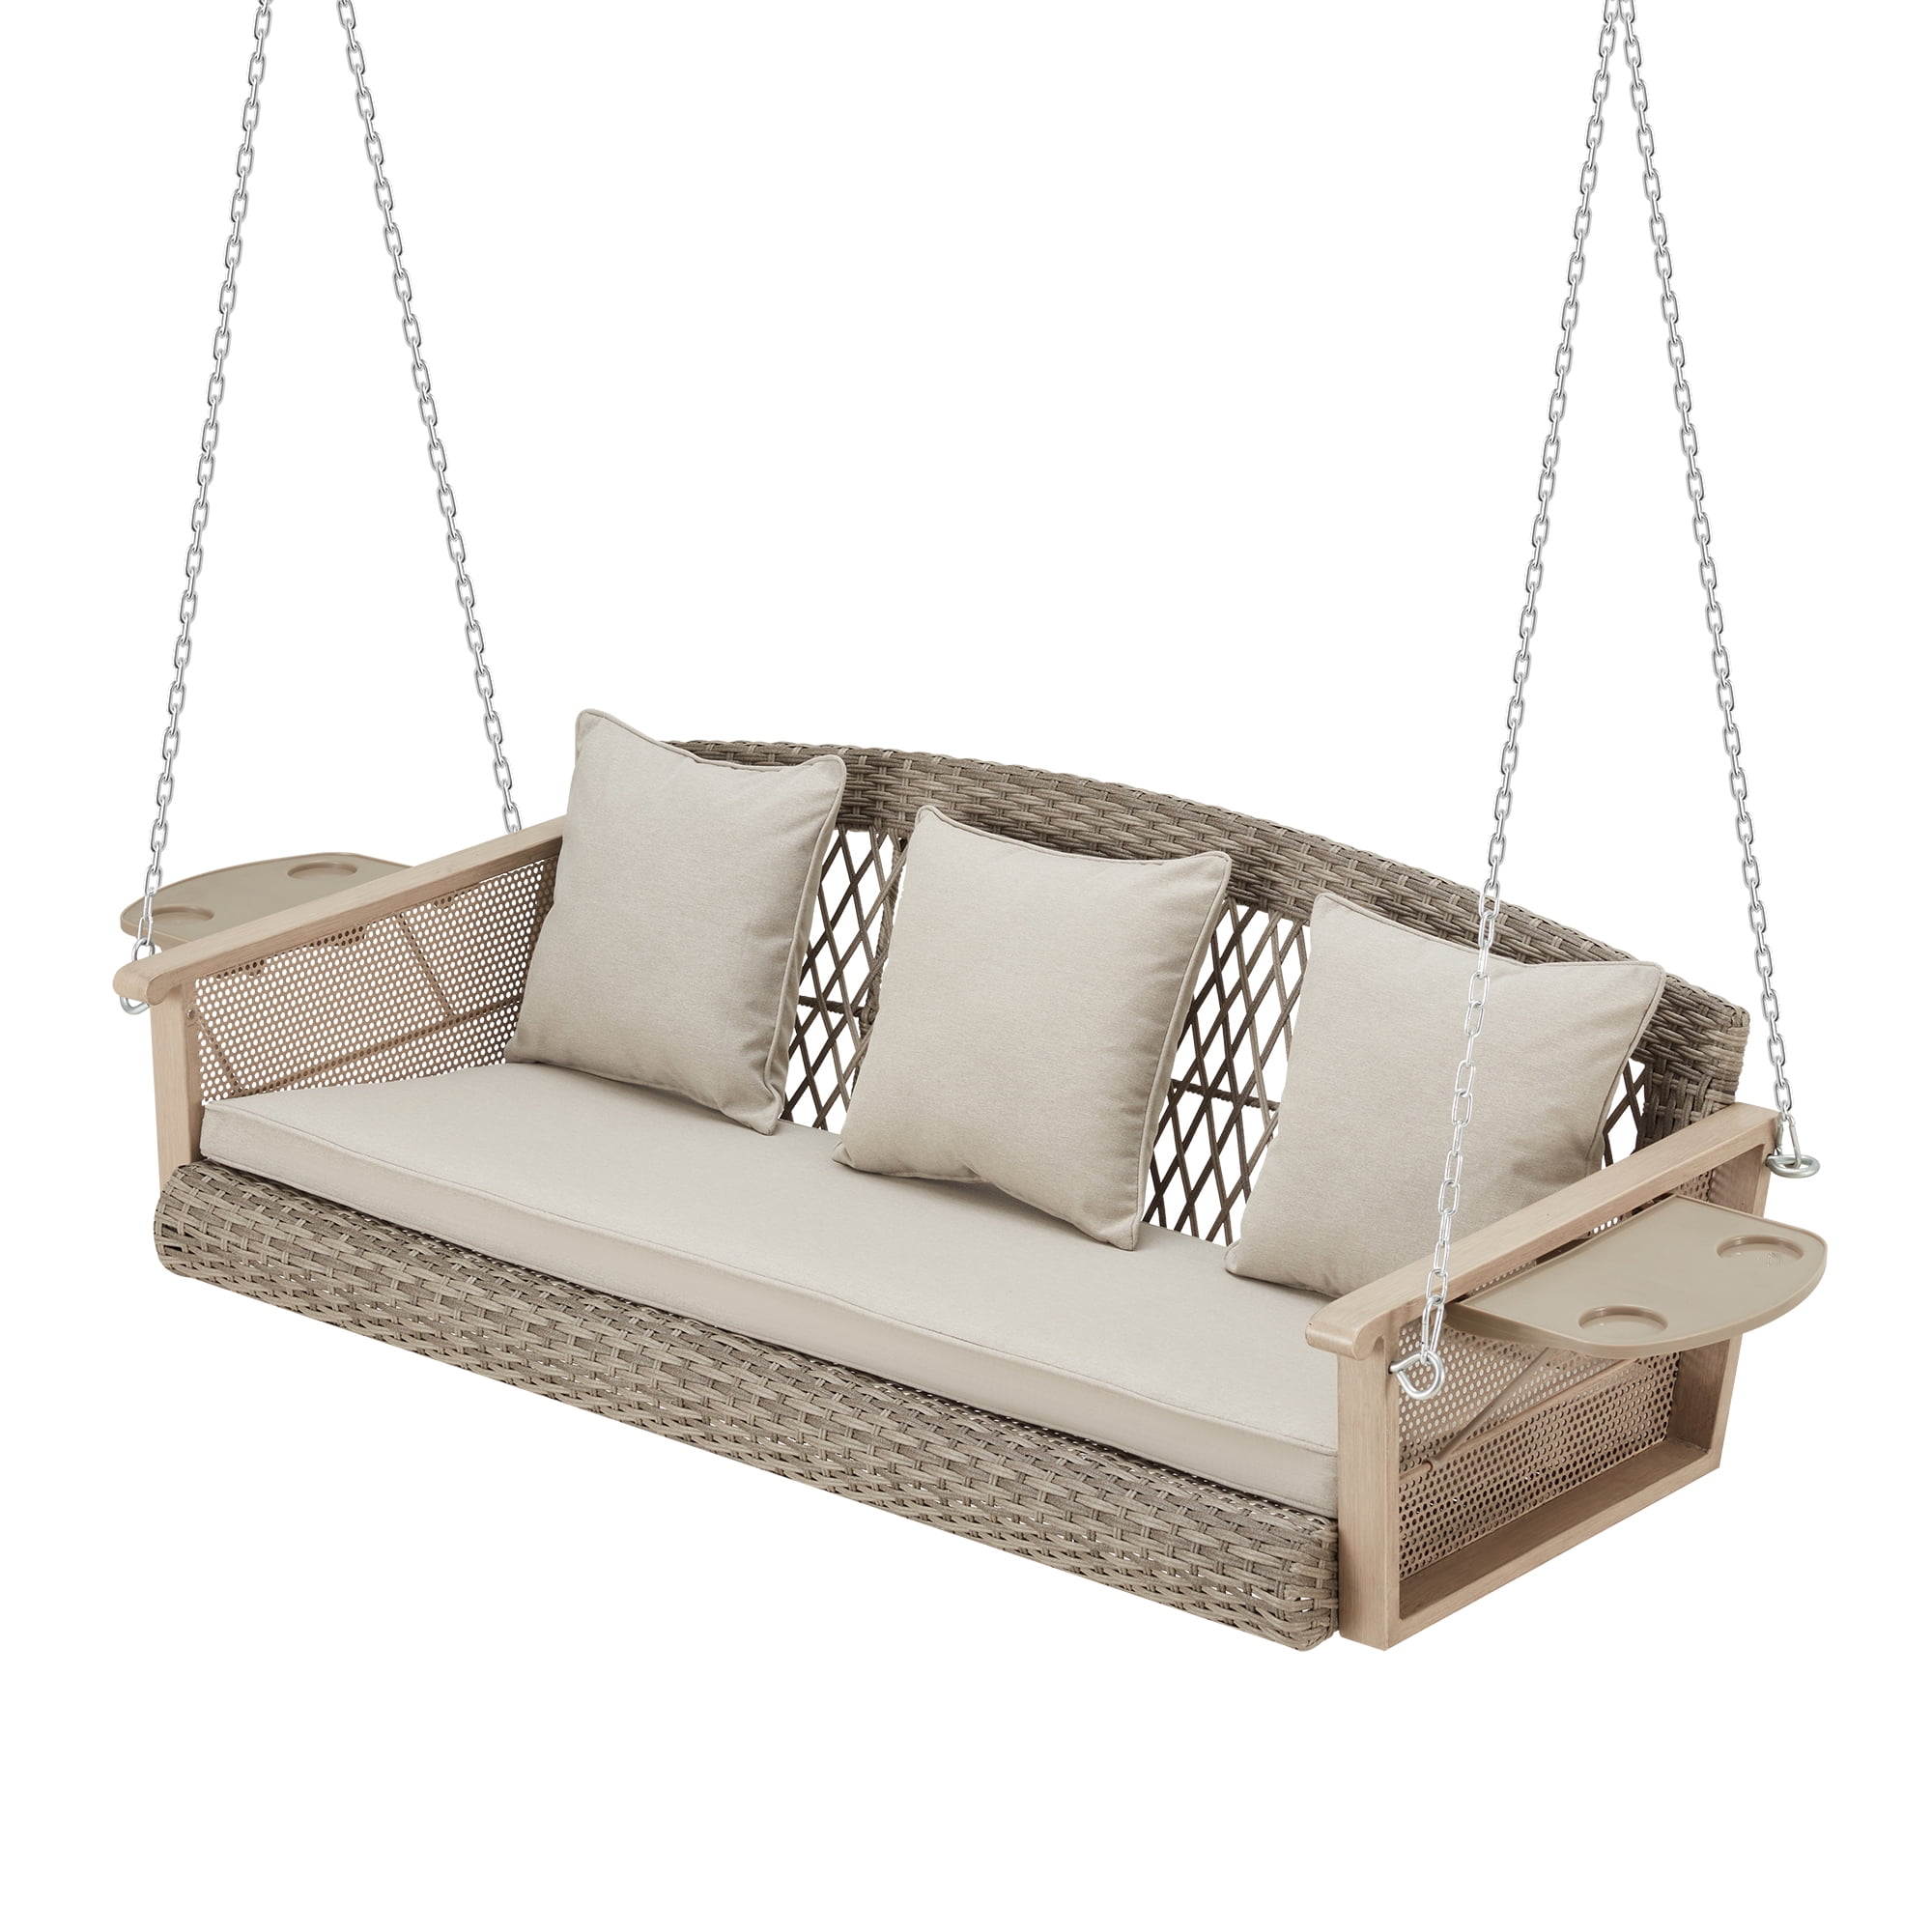 Homrest 3-Person Porch Swing 55in Wicker Hanging Swing Bench with ...